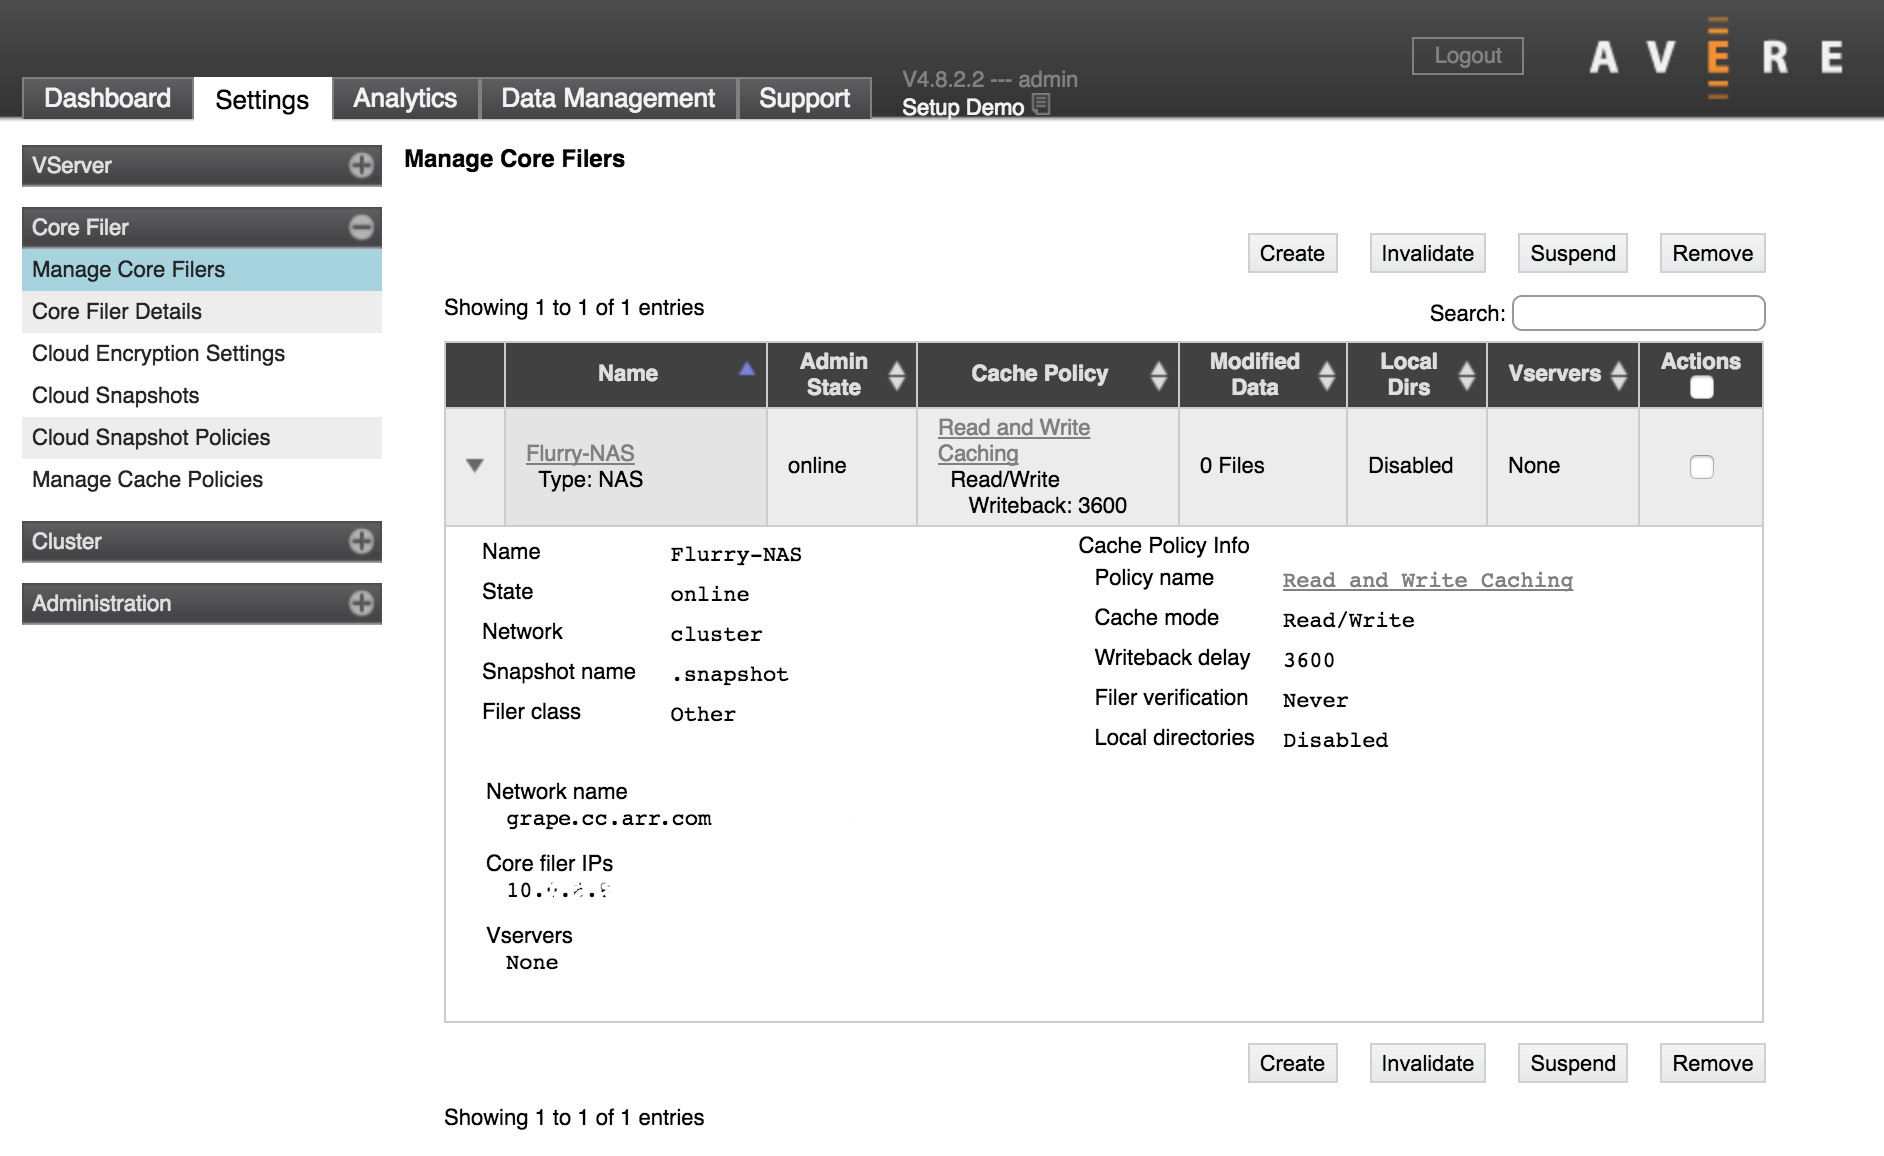 core filer "Flurry-NAS" in the Manage Core Filers settings page, with the filer details view expanded